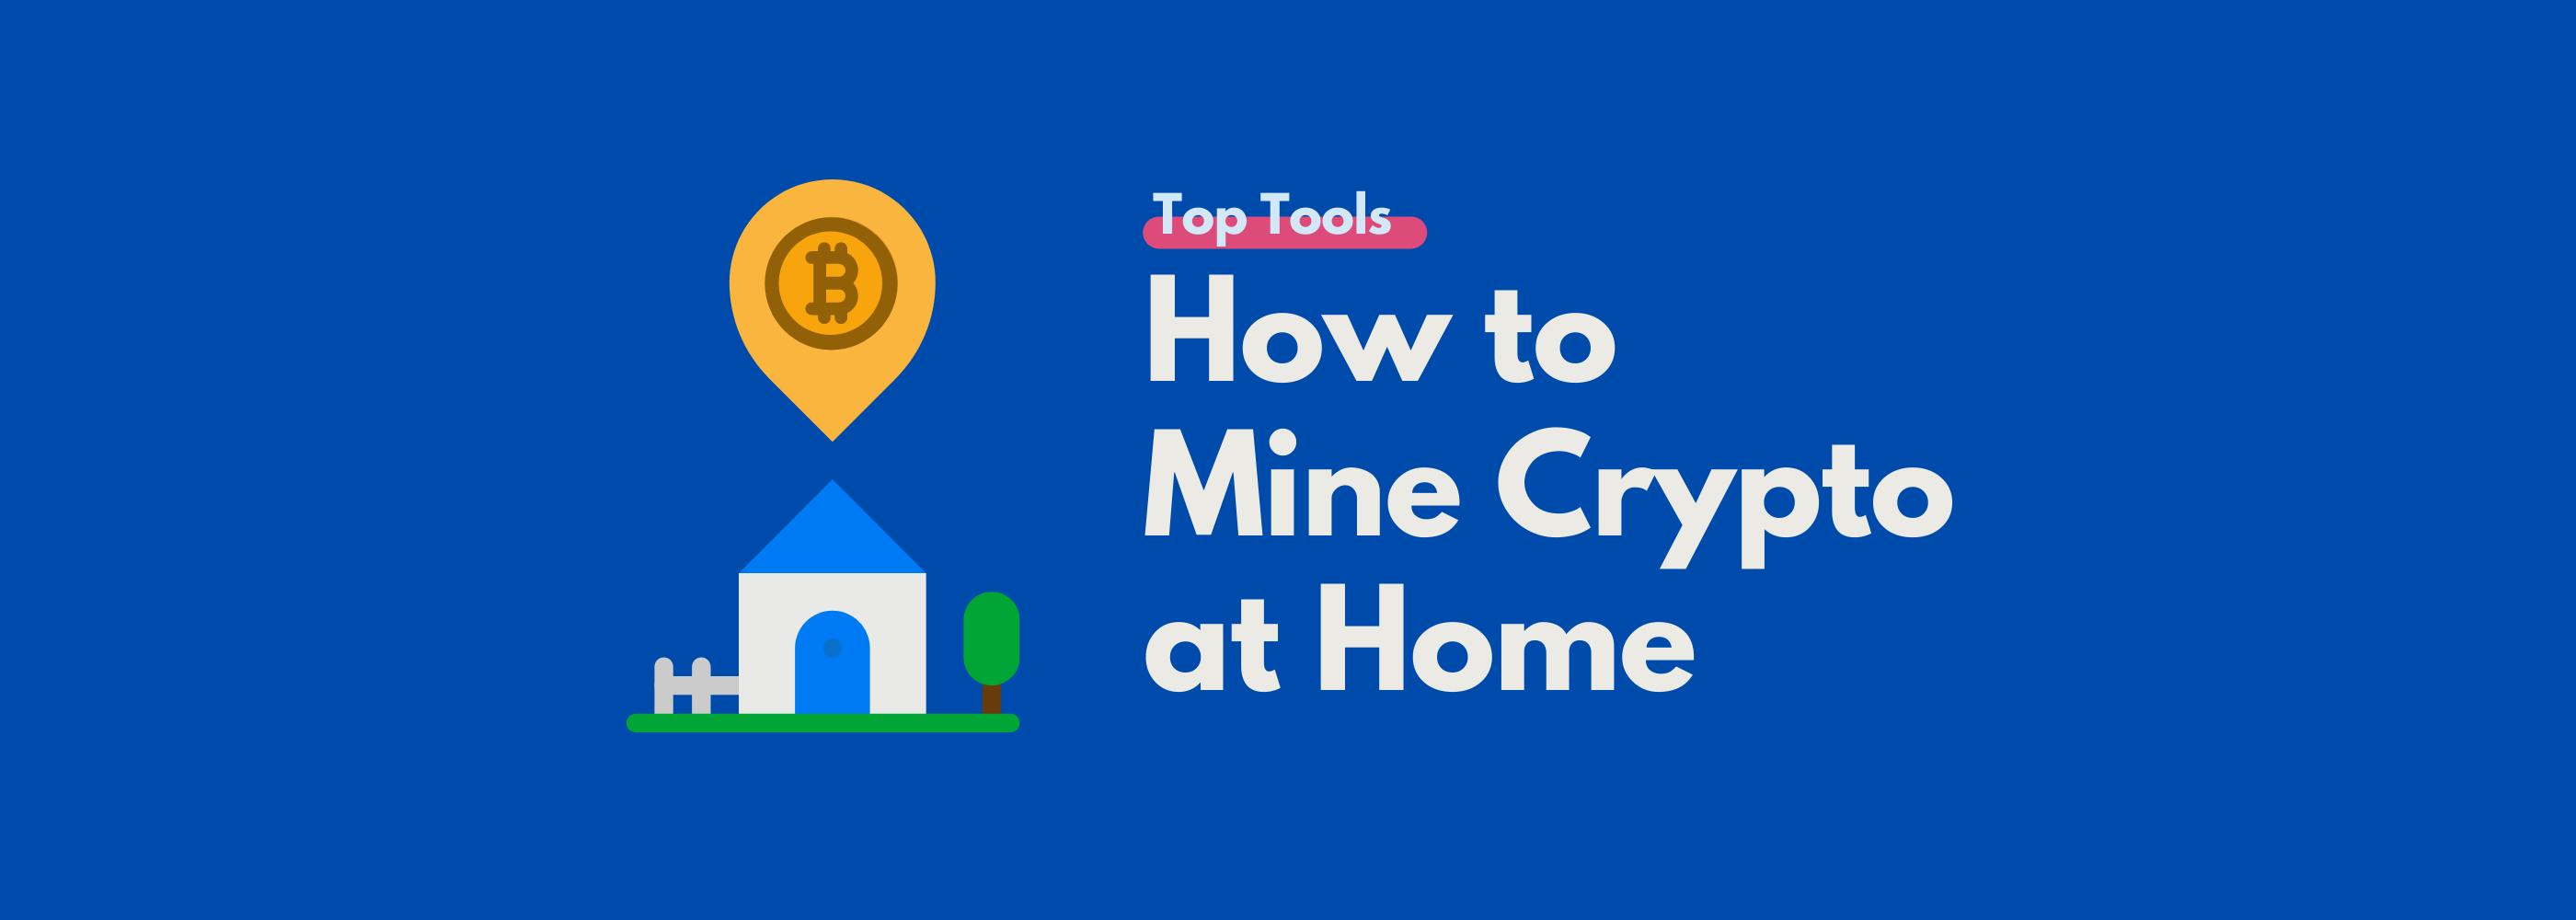 How to mine crypto at home